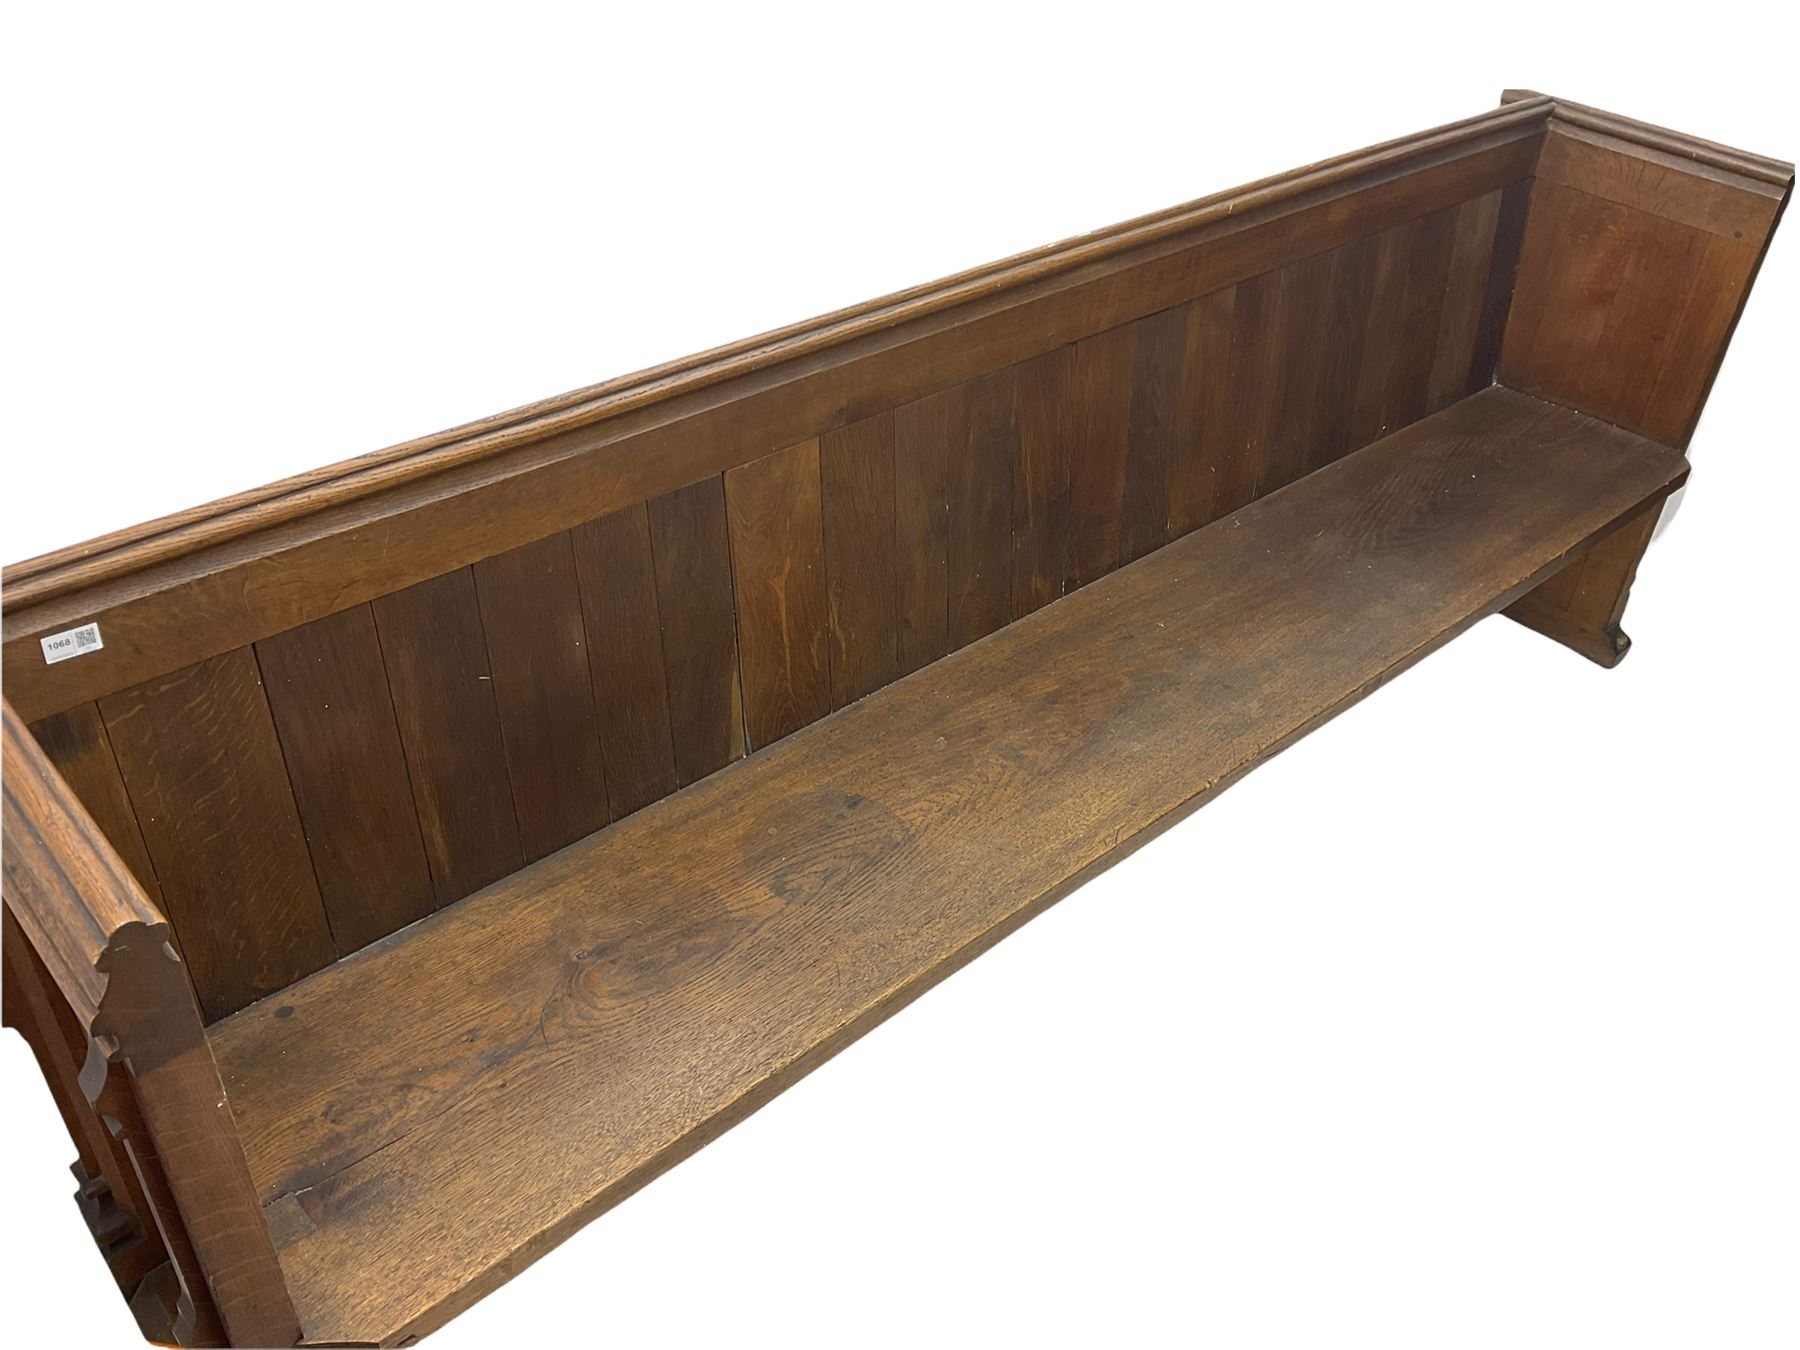 Victorian solid oak pew - Image 2 of 5